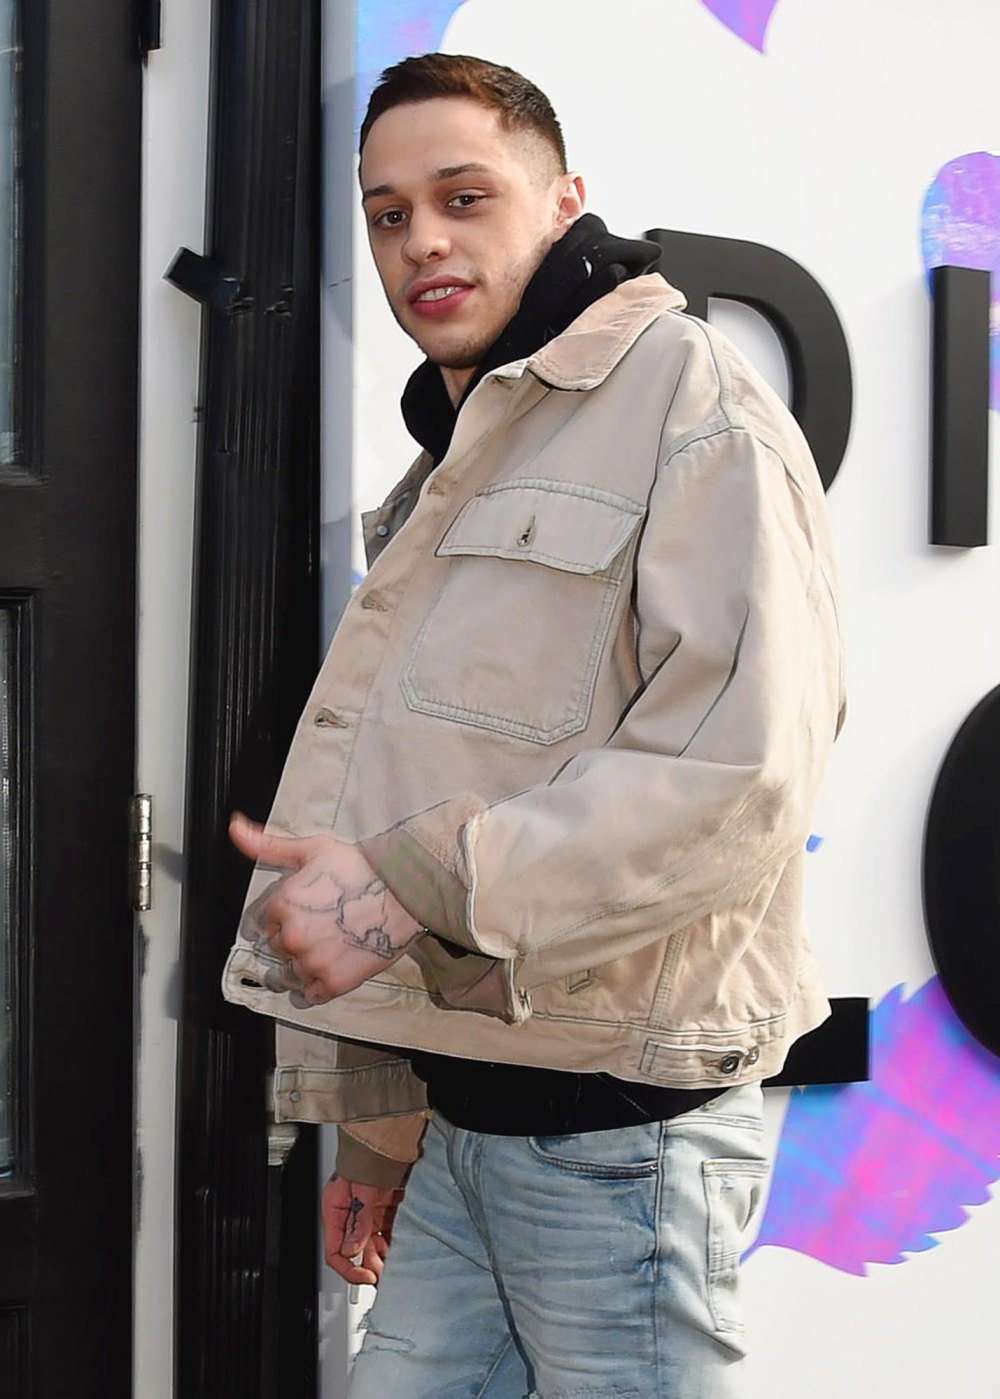 Pete-Davidson-Reportedly-Charged-With-Reckless-Driving-Following-March-Car-Accident-With-Girlfriend-Chase-Sui-Wonders-488-493